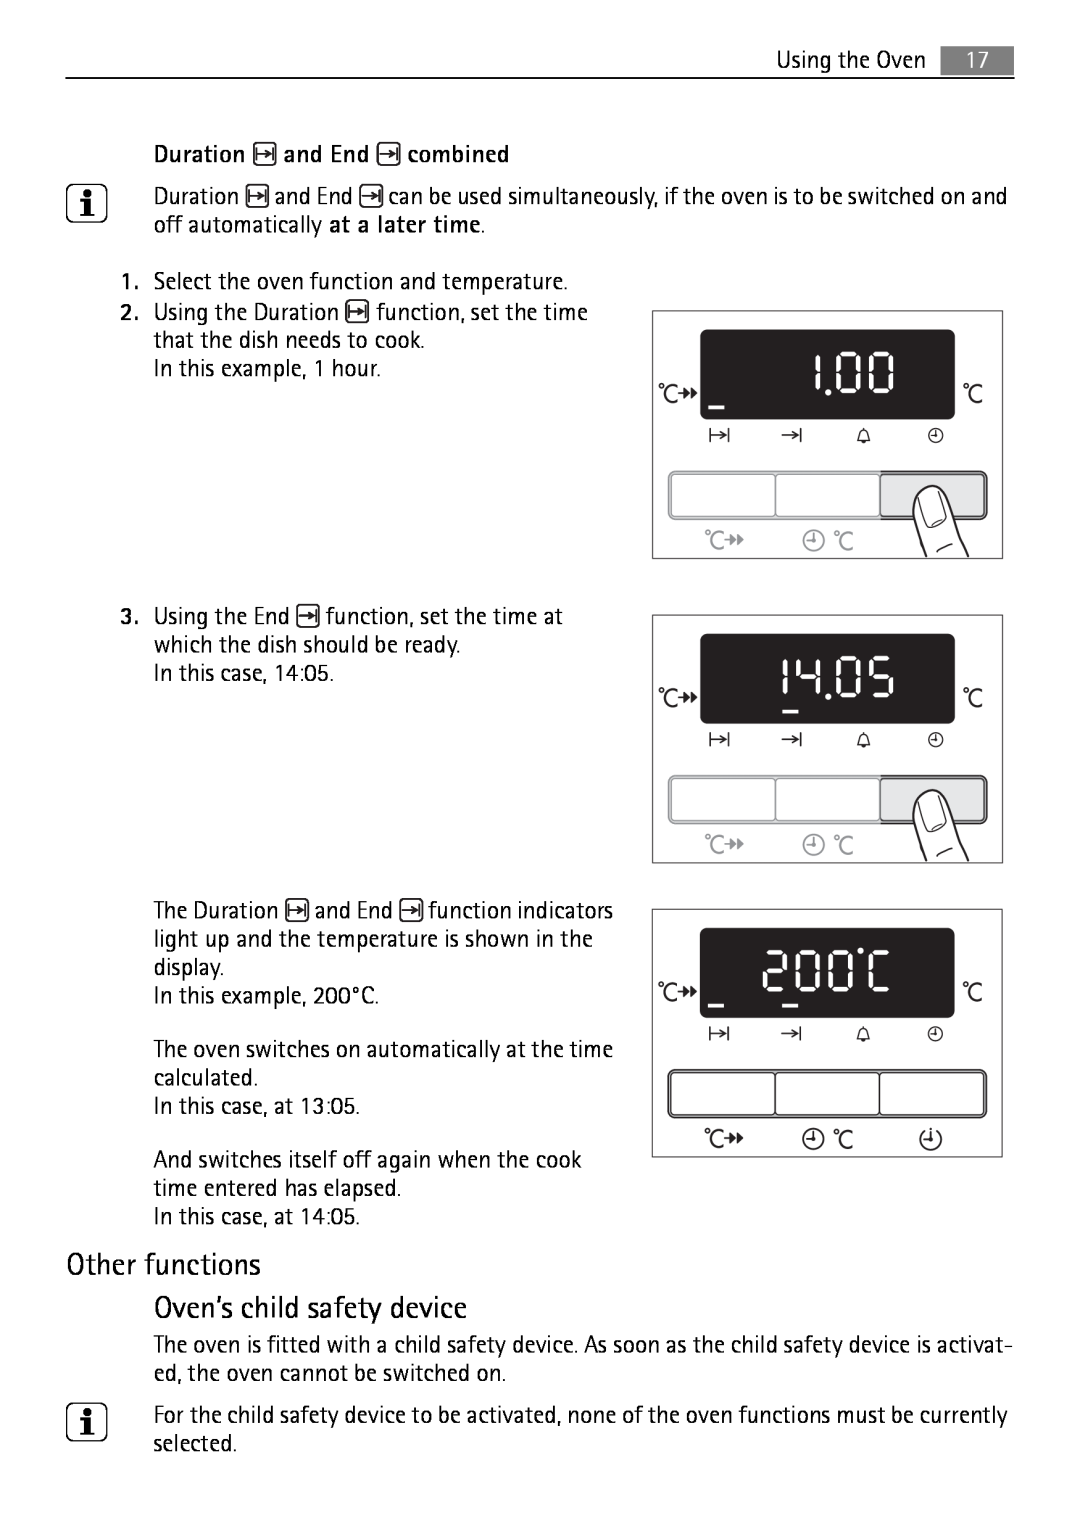 Electrolux B3741-5 user manual Other functions Oven’s child safety device, Duration and End combined 